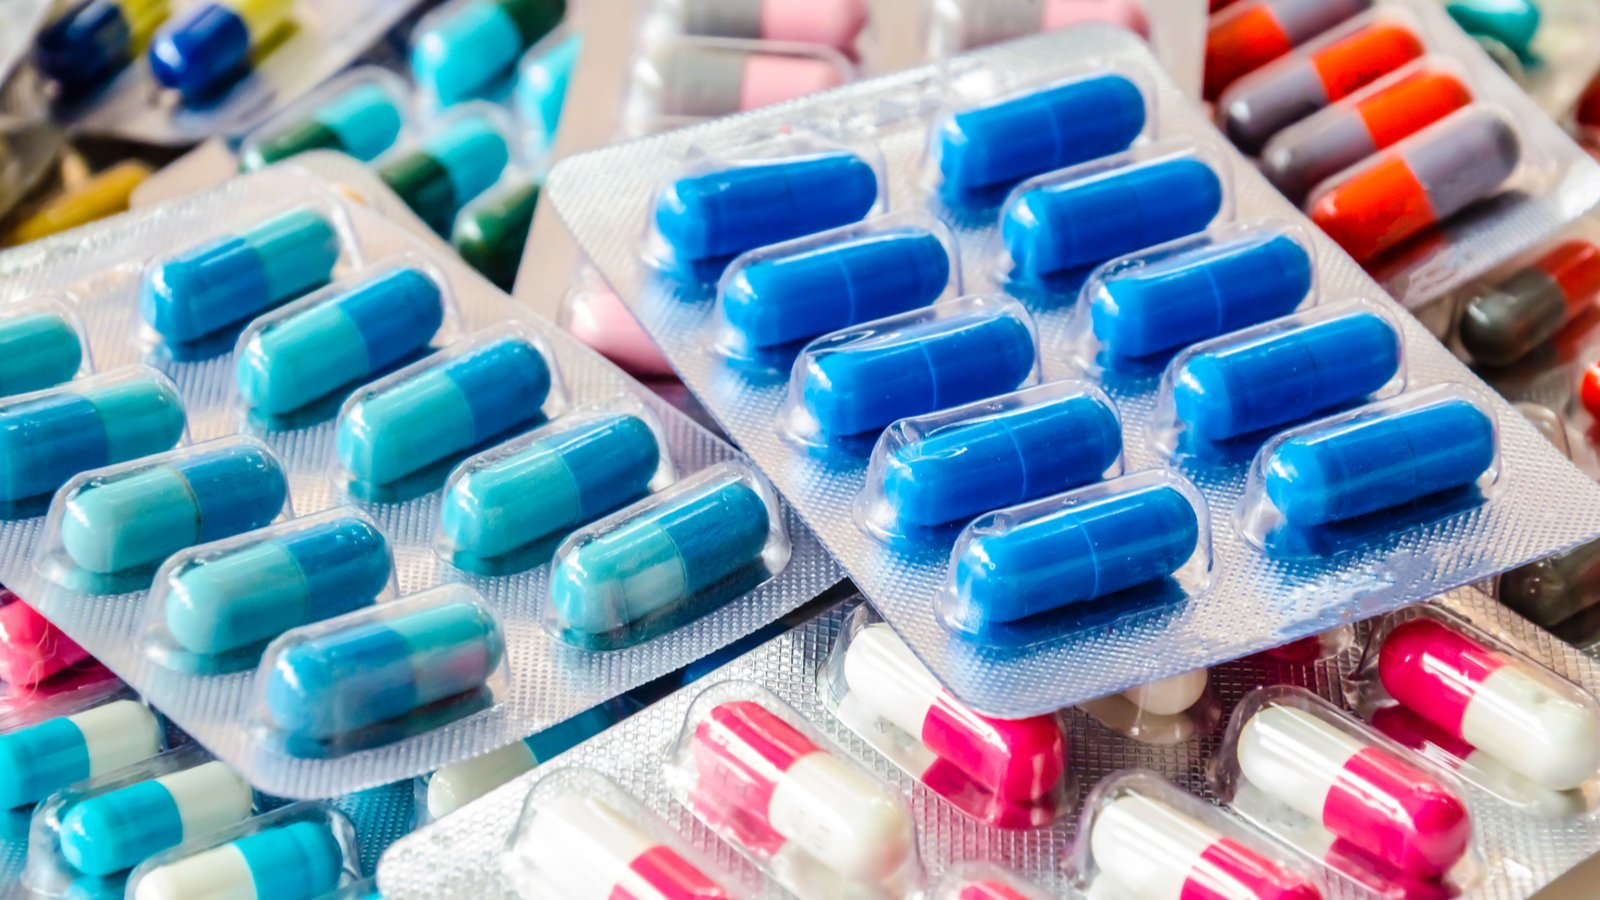 Packs of blue and pink pills are piled on top of each other representing ATHA Stock.